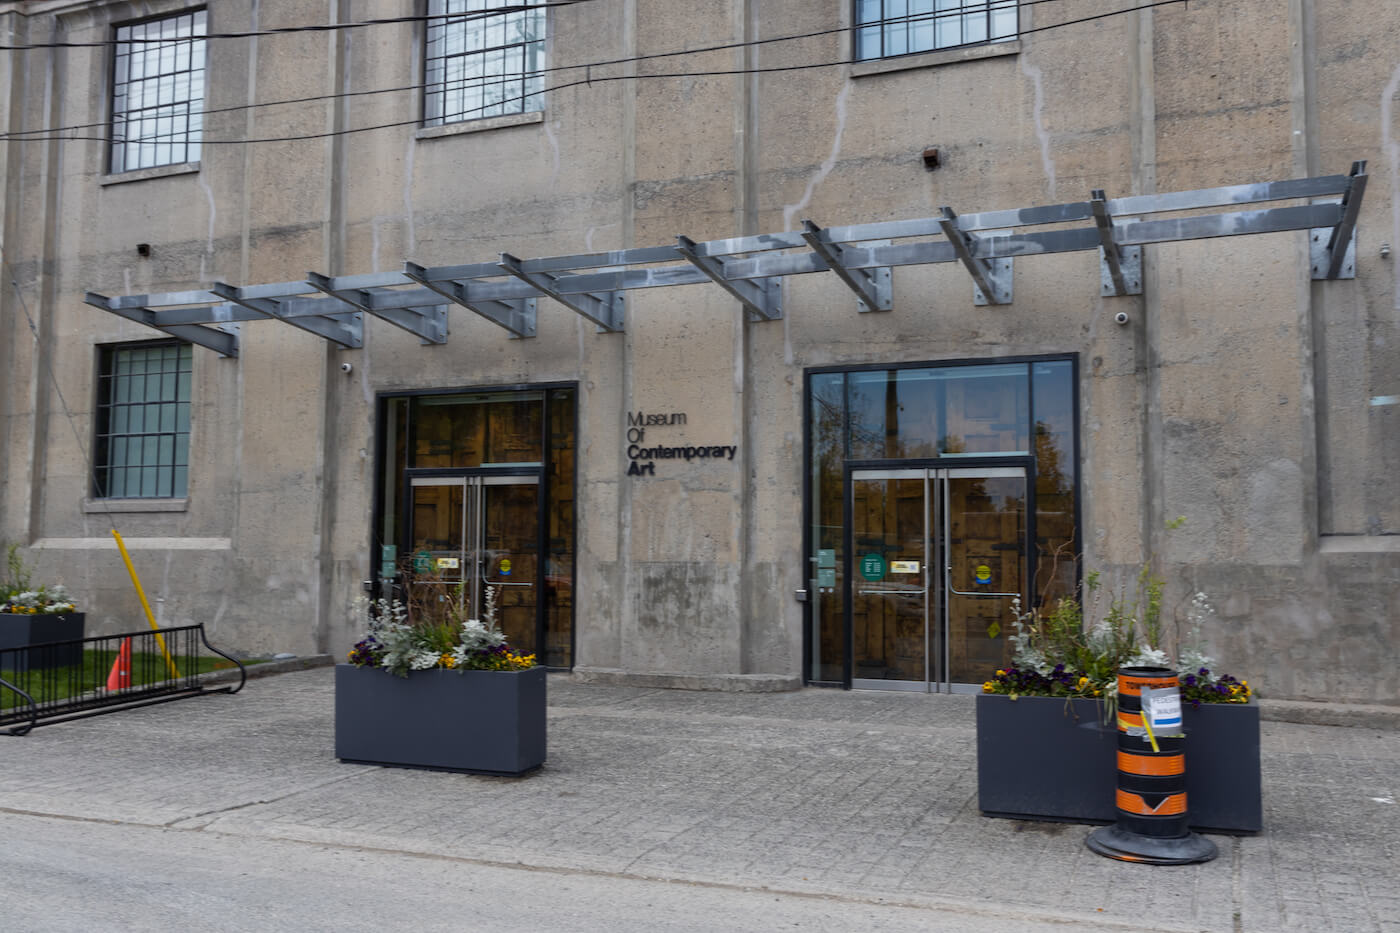 Things to do in roncesvalles - Museum of contemporary art